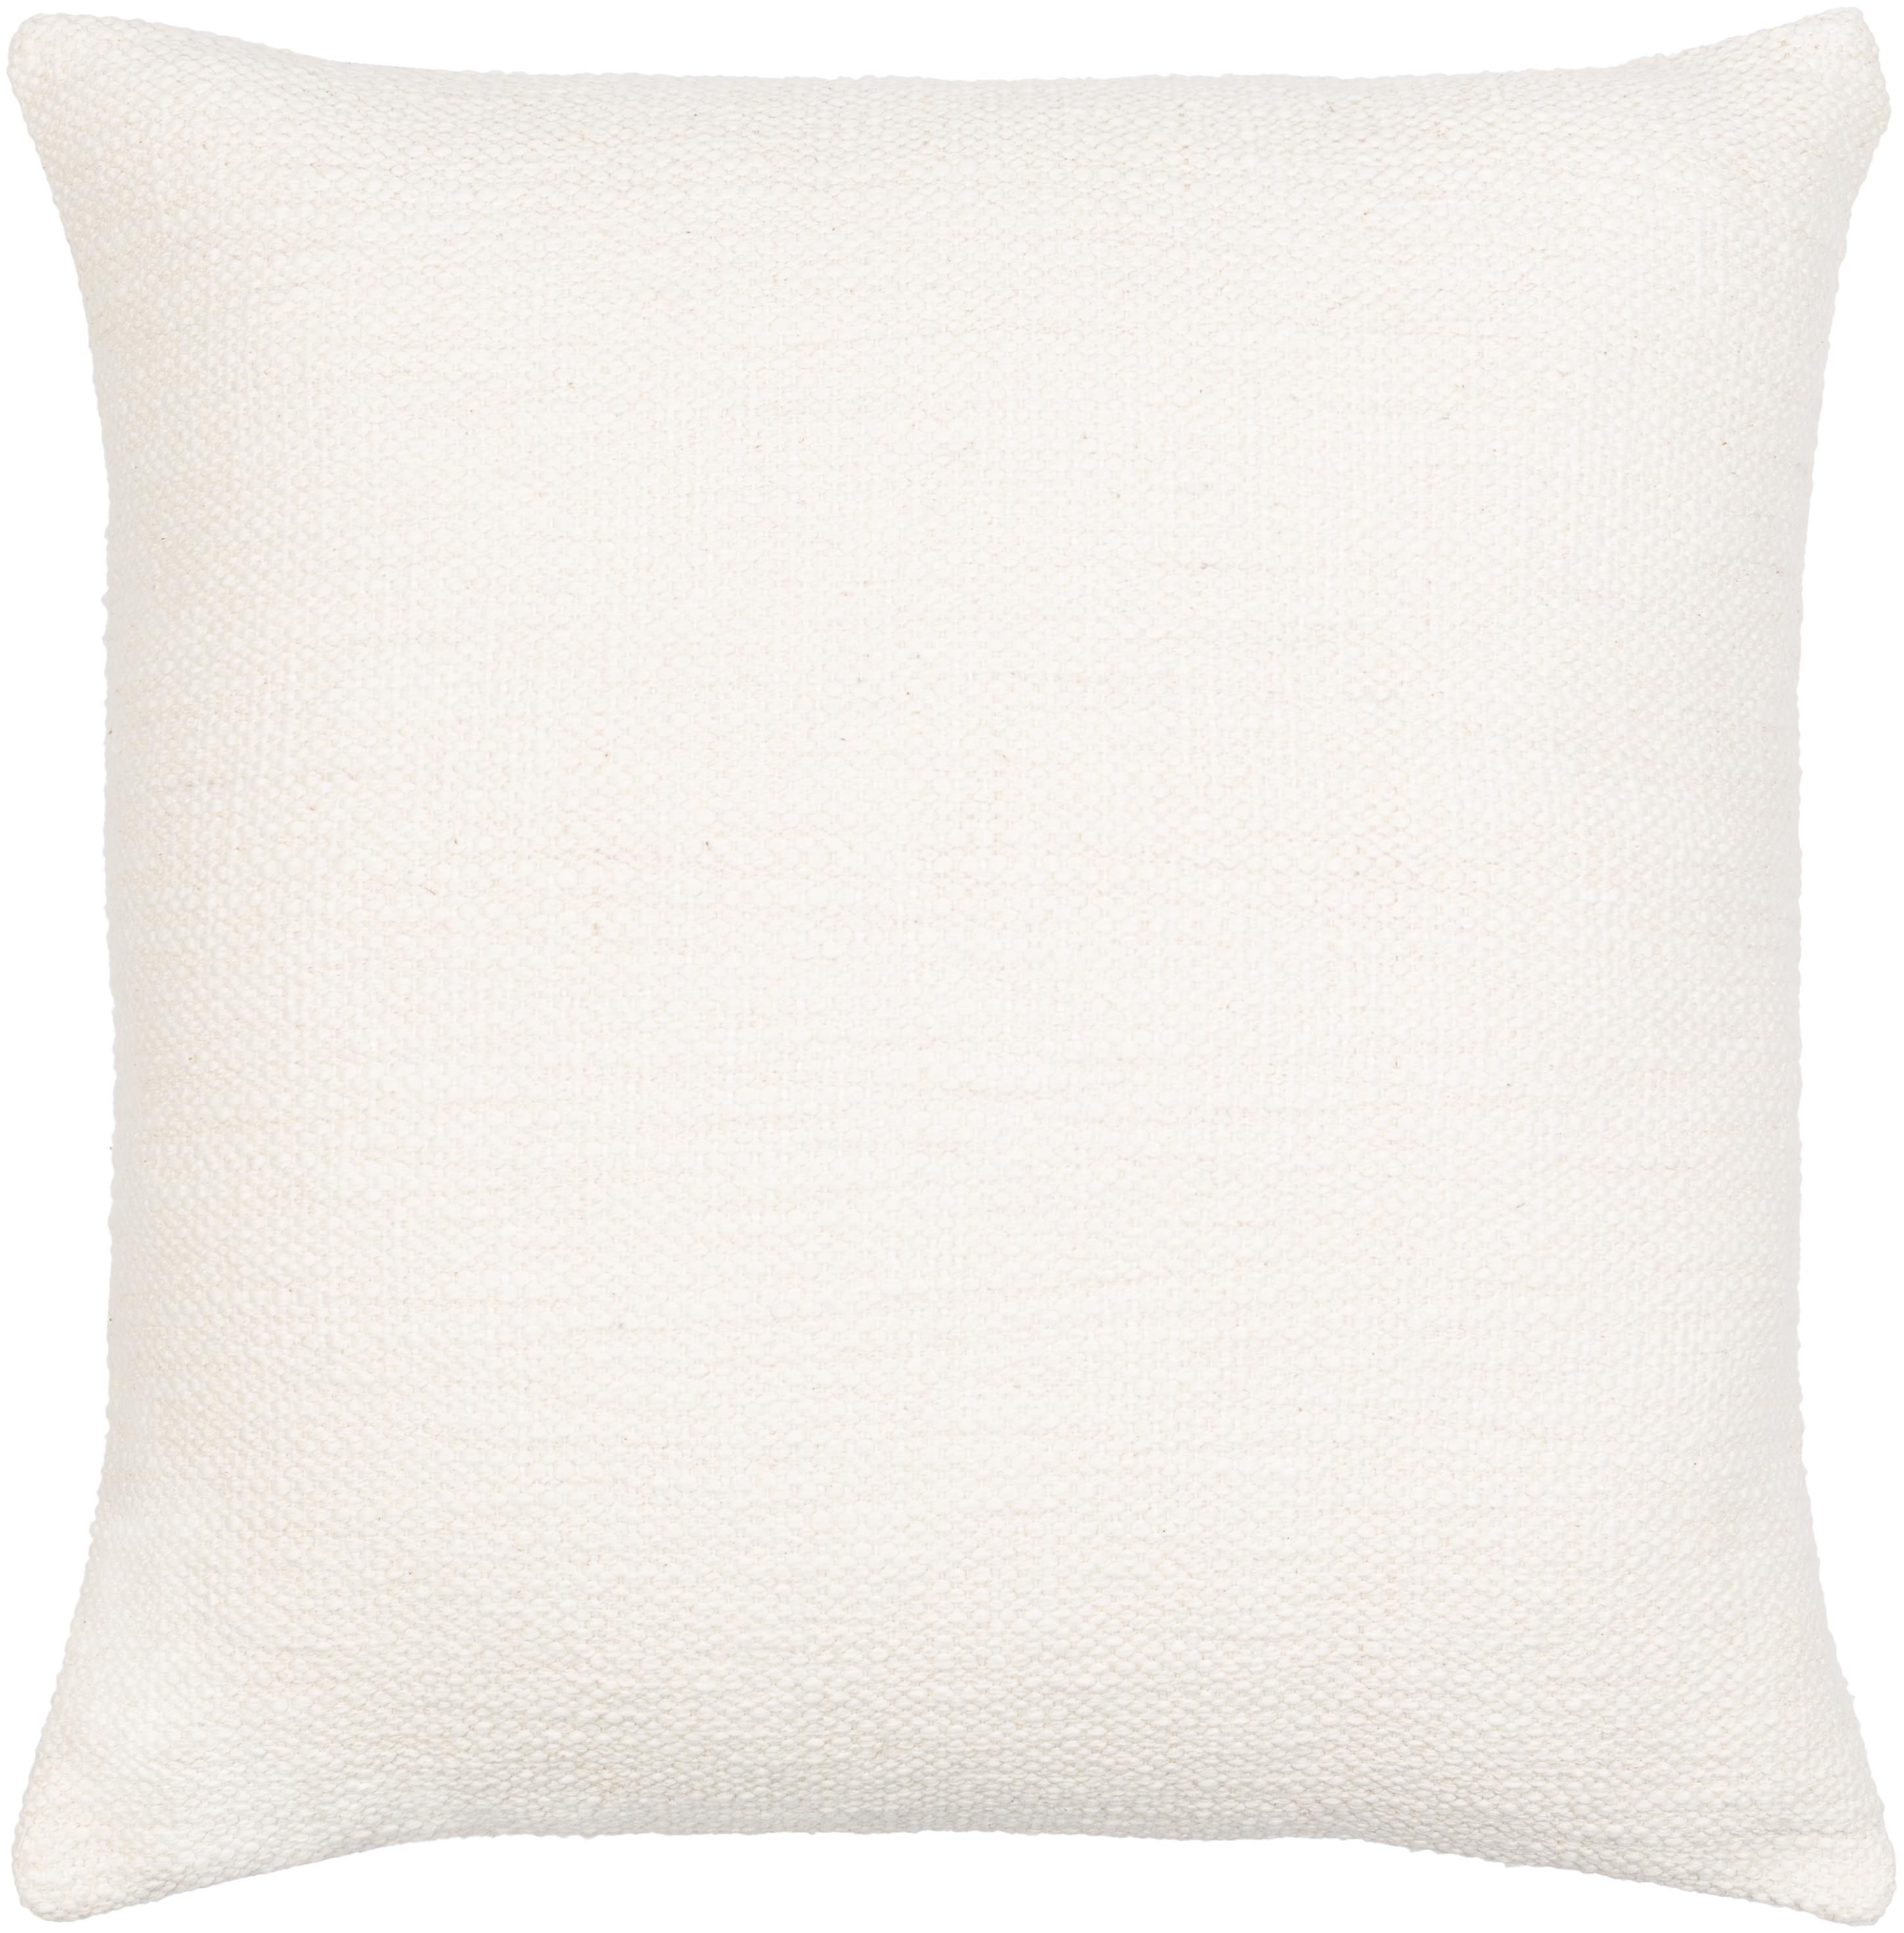 Bisa Throw Pillow, 14" x 22", with down insert - Image 1